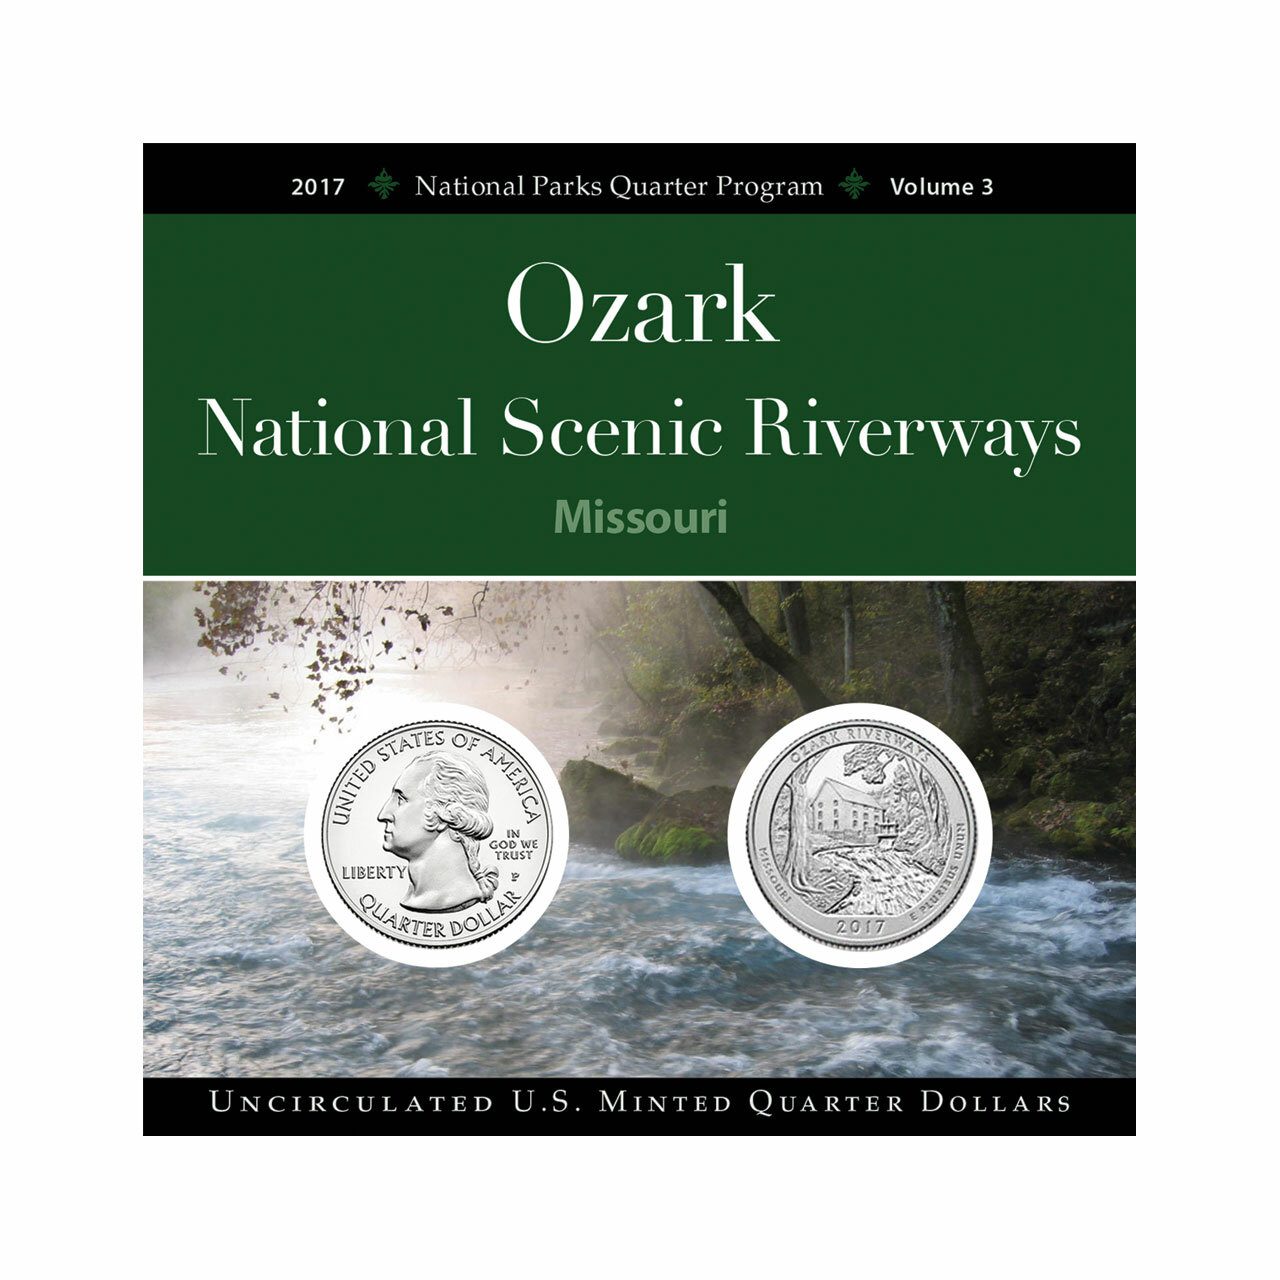 Ozark National Scenic Riverways Quarter Collection